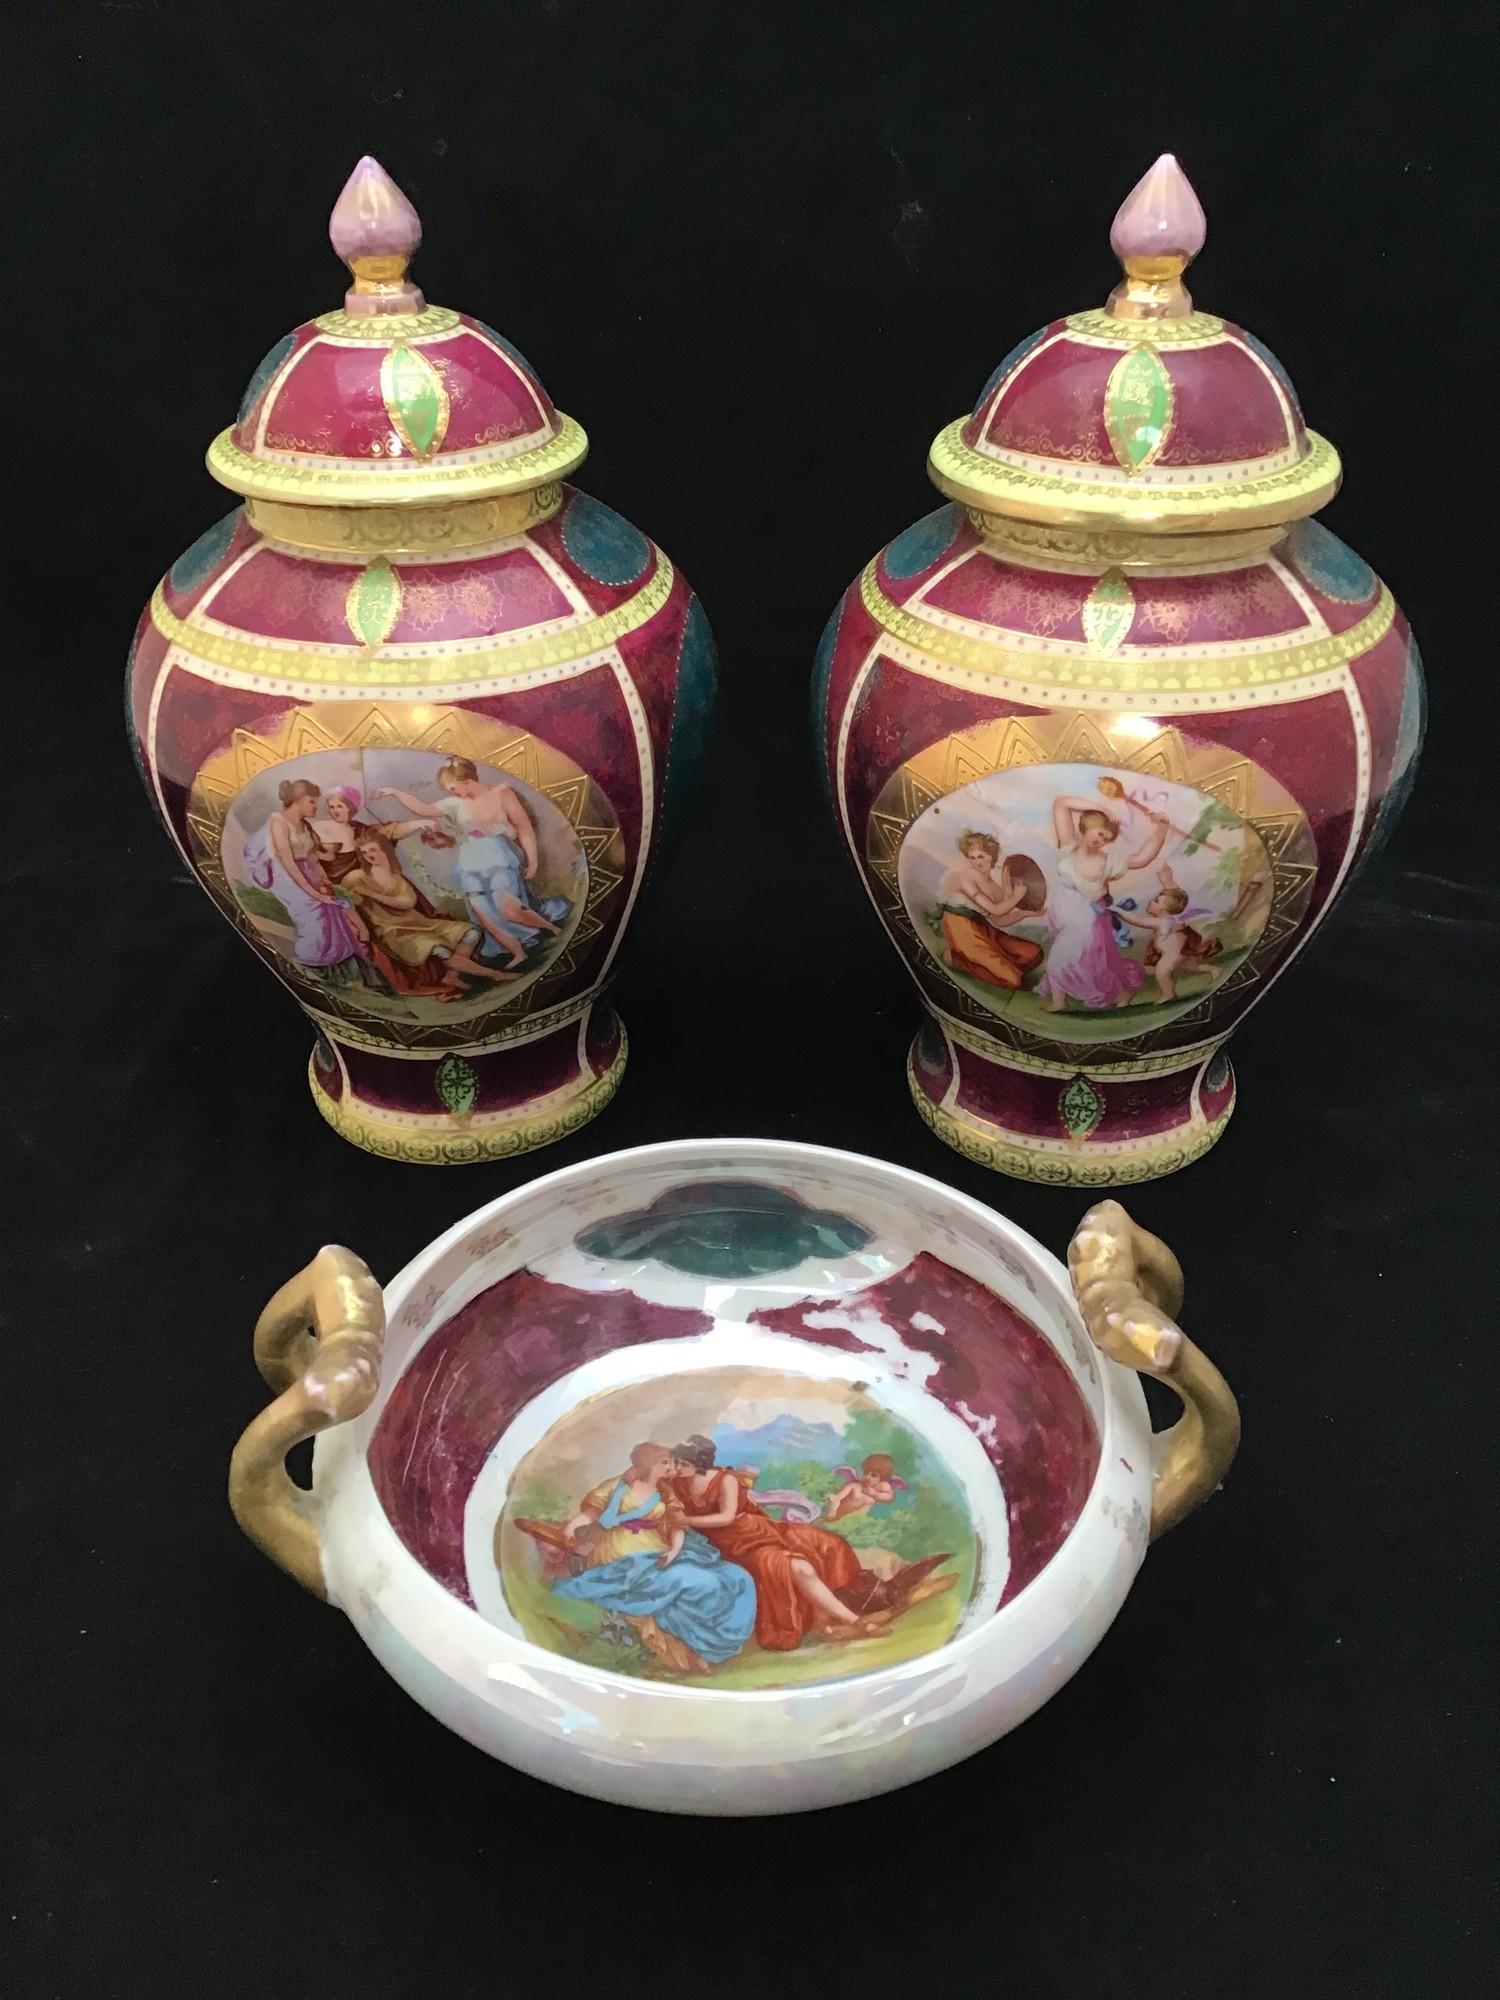 A pair of Royal Vienna porcelain jars with covers, of baluster form, panels painted with classical